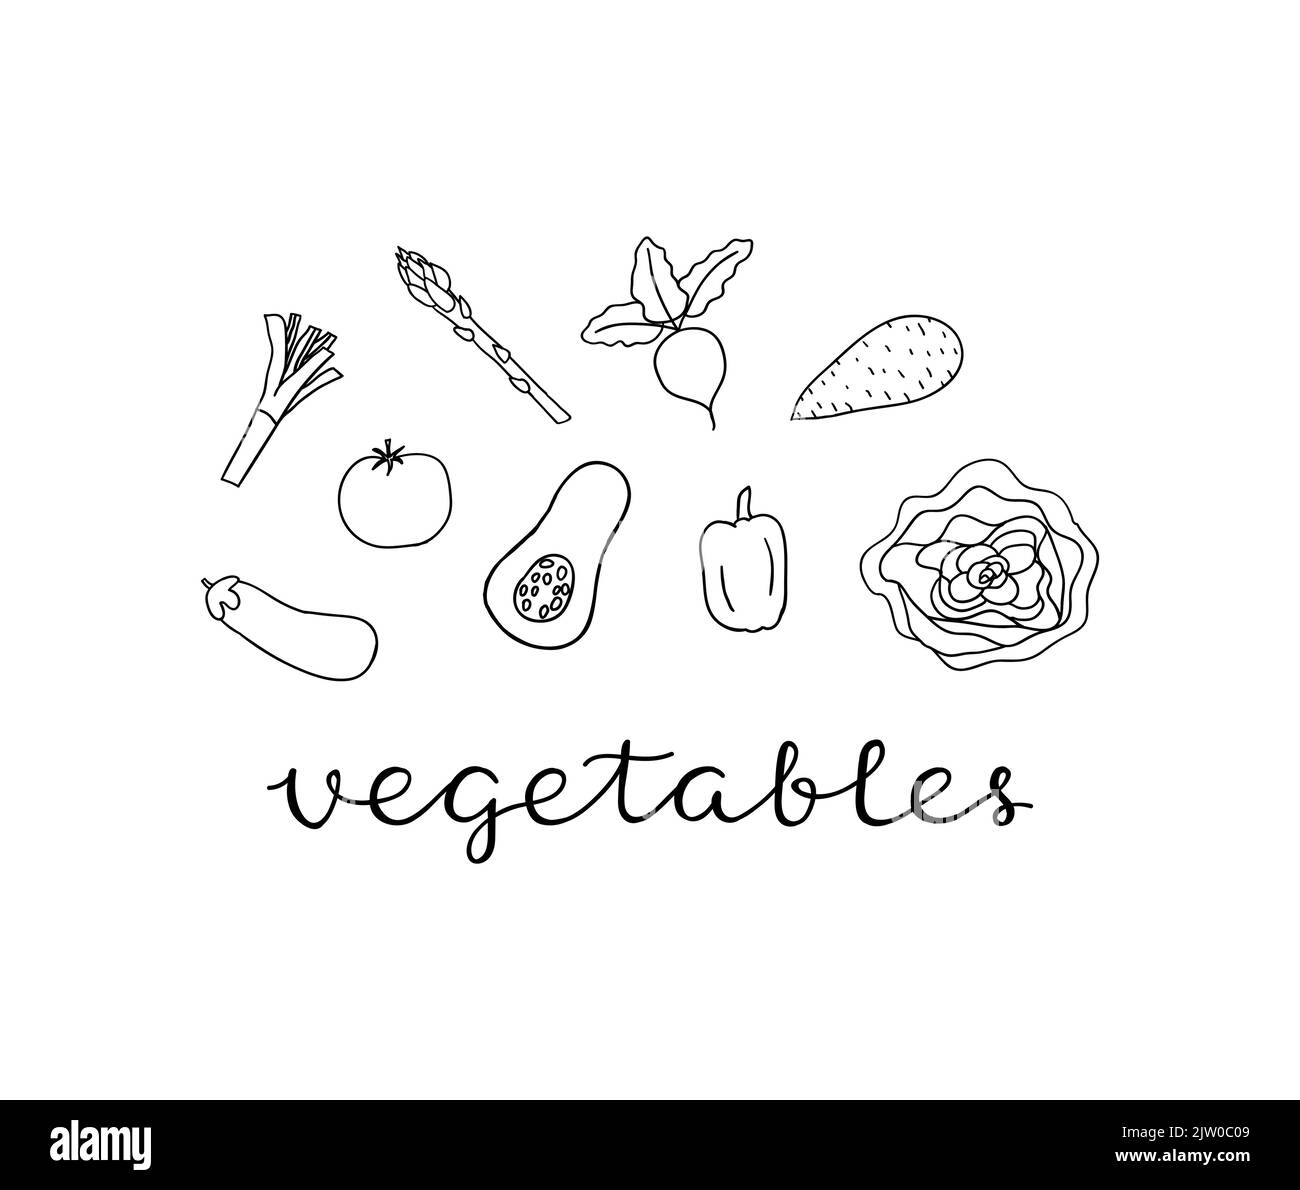 Composition with hand drawn outline vegetables and lettering on white background. Stock Vector